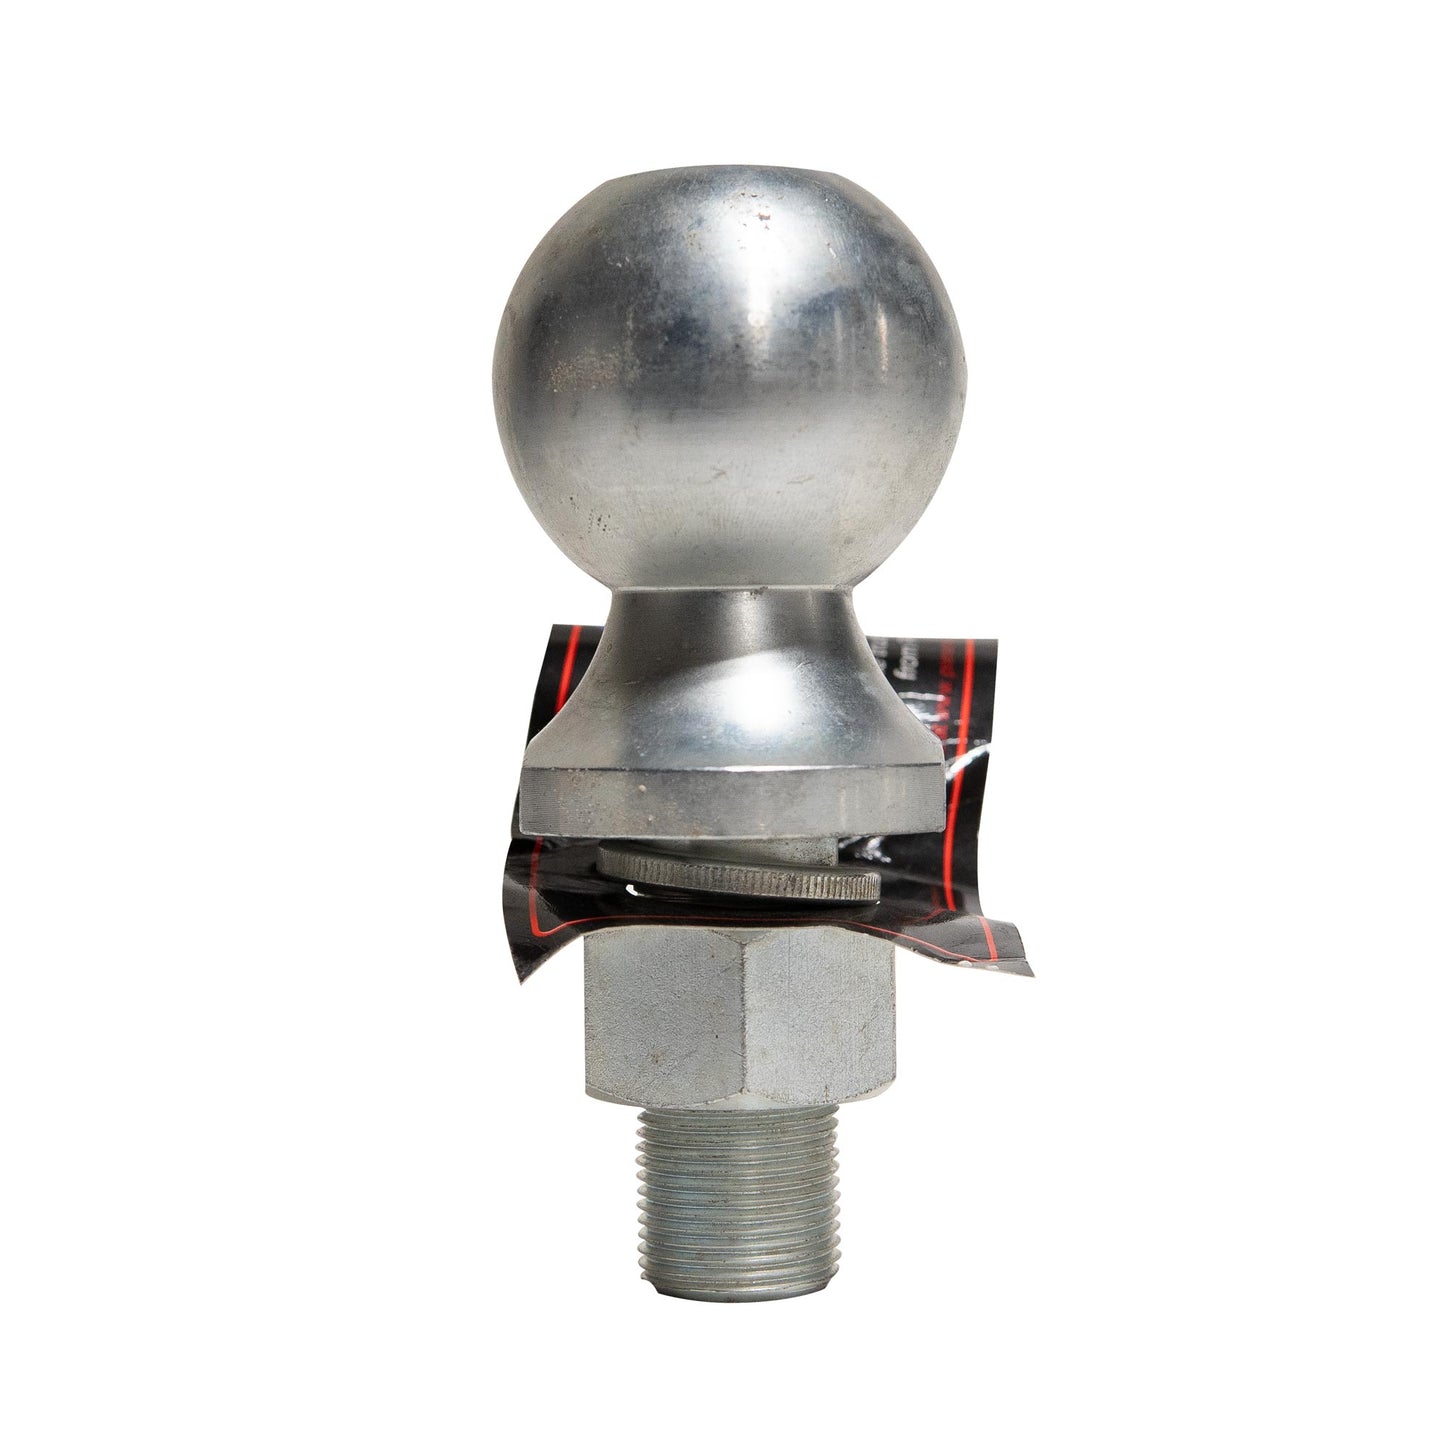 Tow Hitch 2-5/16 Trailer Ball 6K 10K Capacity Zinc Chrome (PS-18060 PS-18062 PS-18069 PS-18070) - The Trailer Parts Outlet